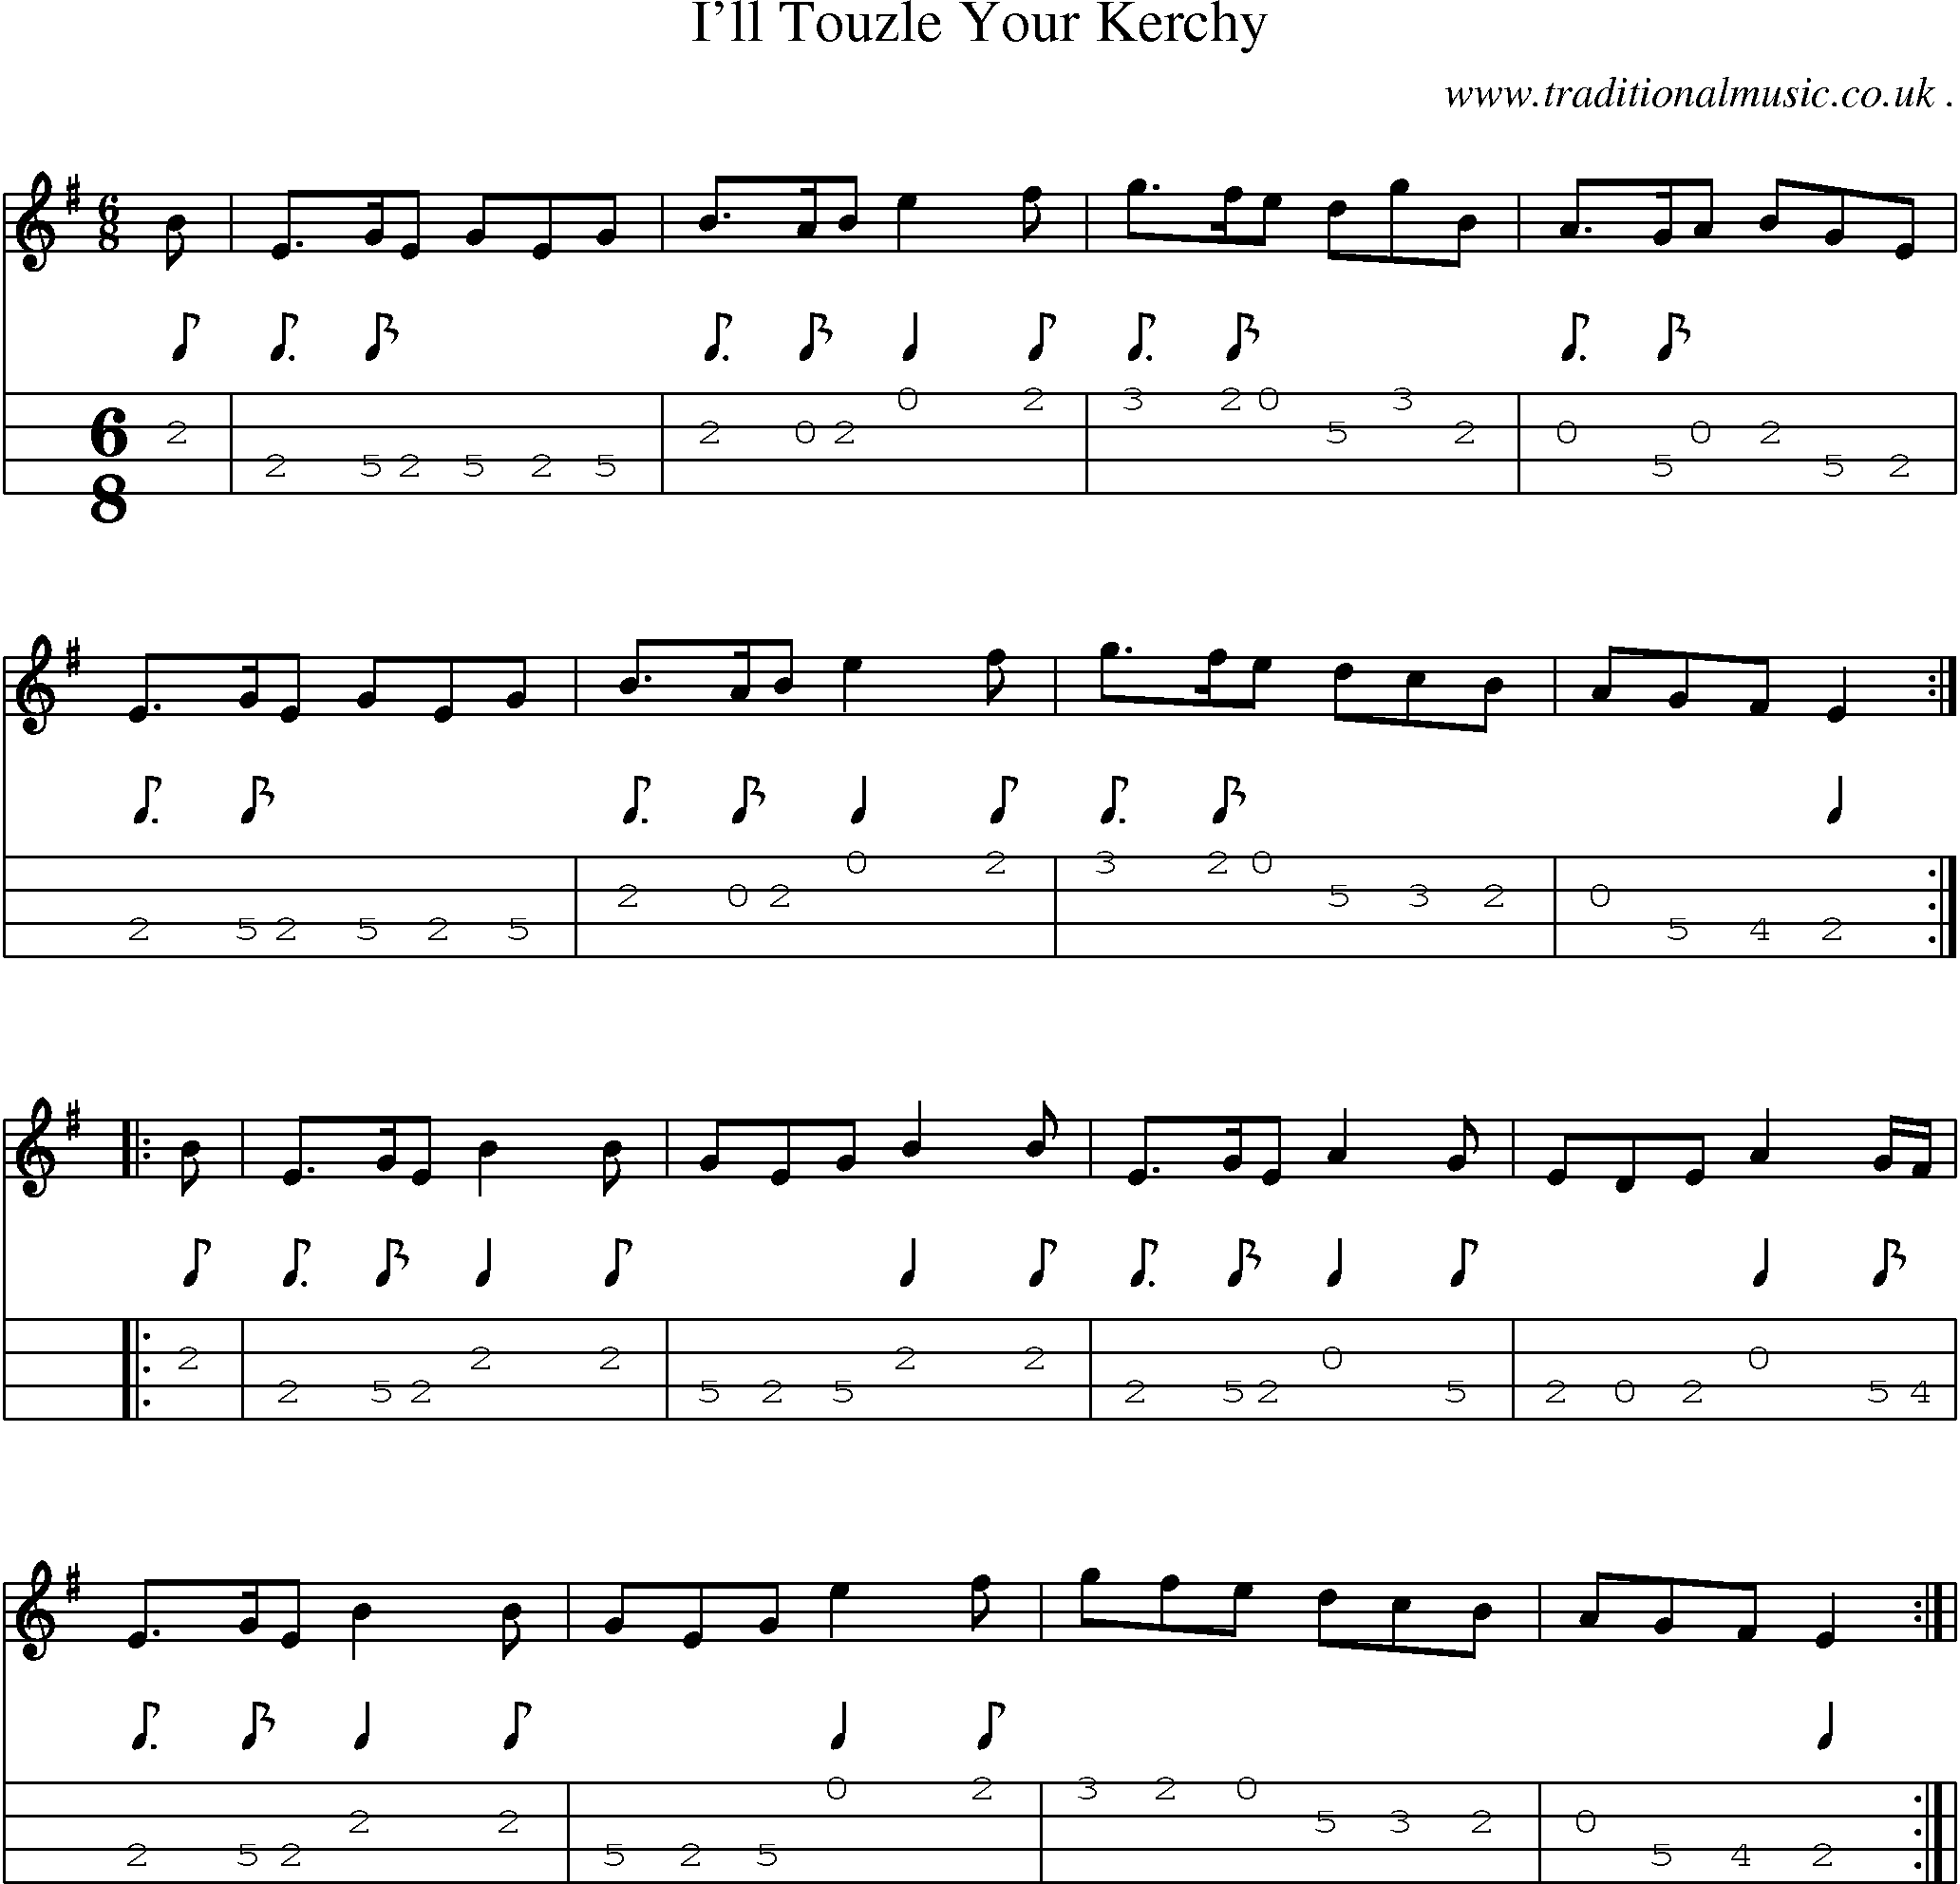 Sheet-Music and Mandolin Tabs for Ill Touzle Your Kerchy